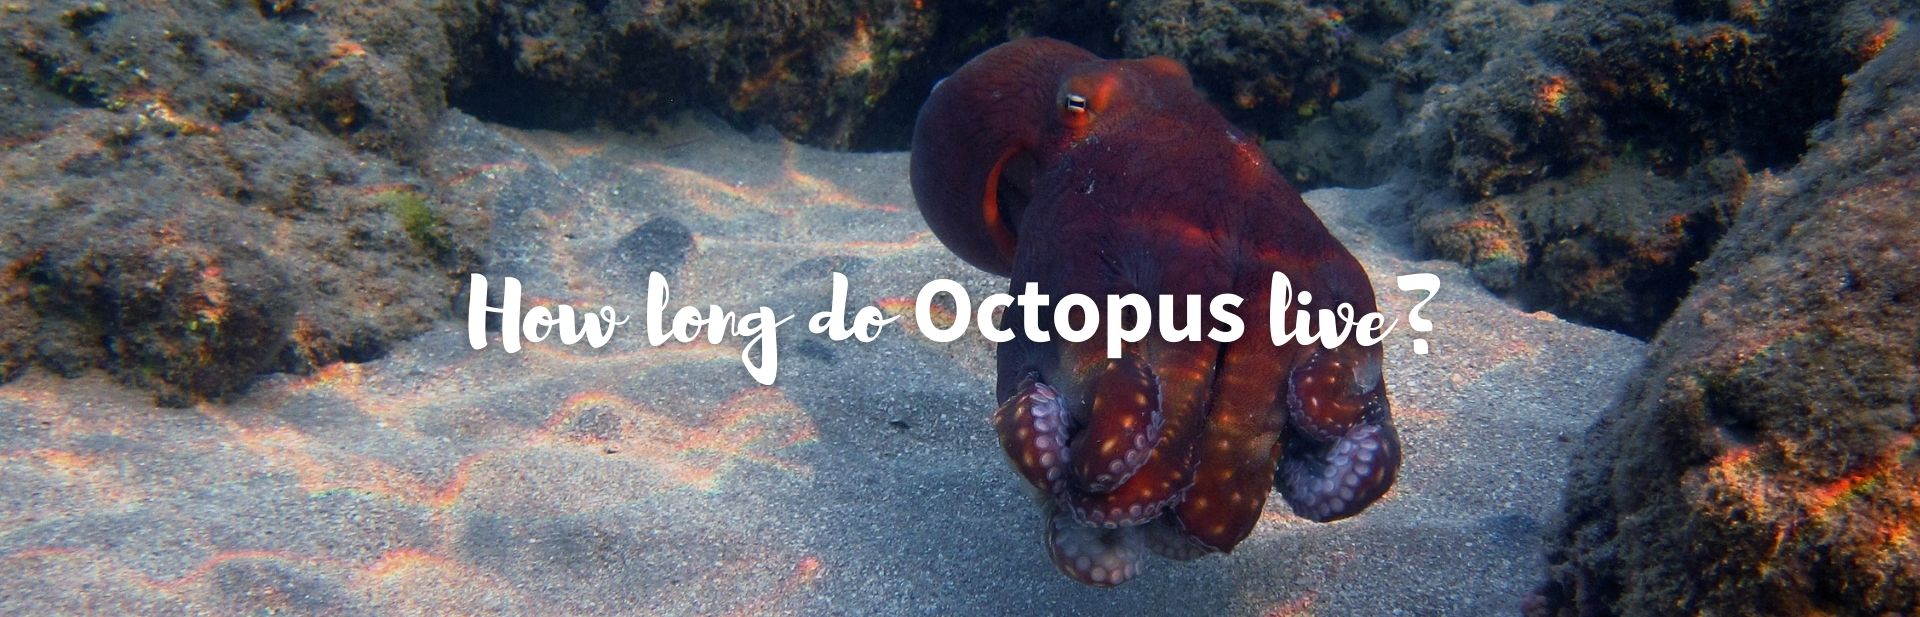 How Long Do Octopus Live? A Look at The Mystery of The Intelligence, Reproduction, And Demise Of These Fascinating Creatures